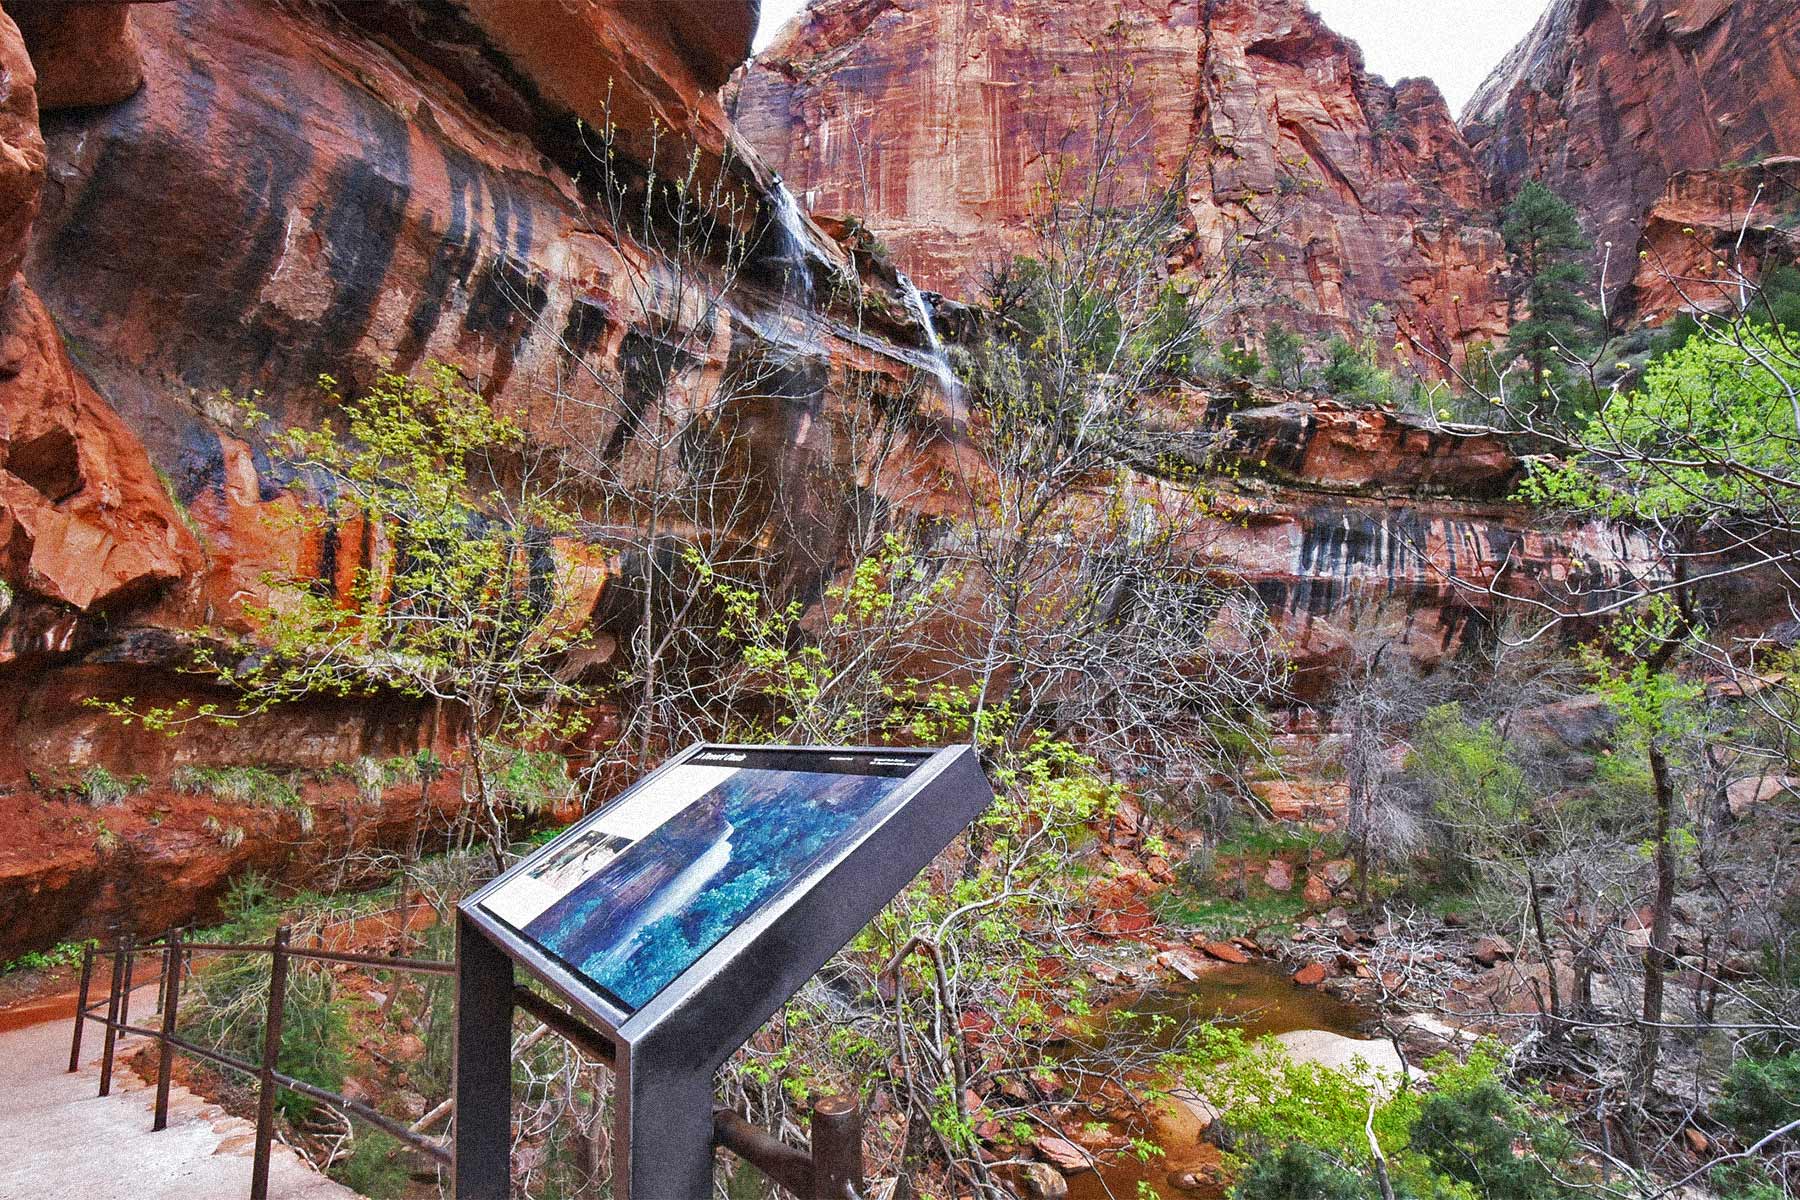 Lower Emerald Pools Trail, Zion National Park Hikes